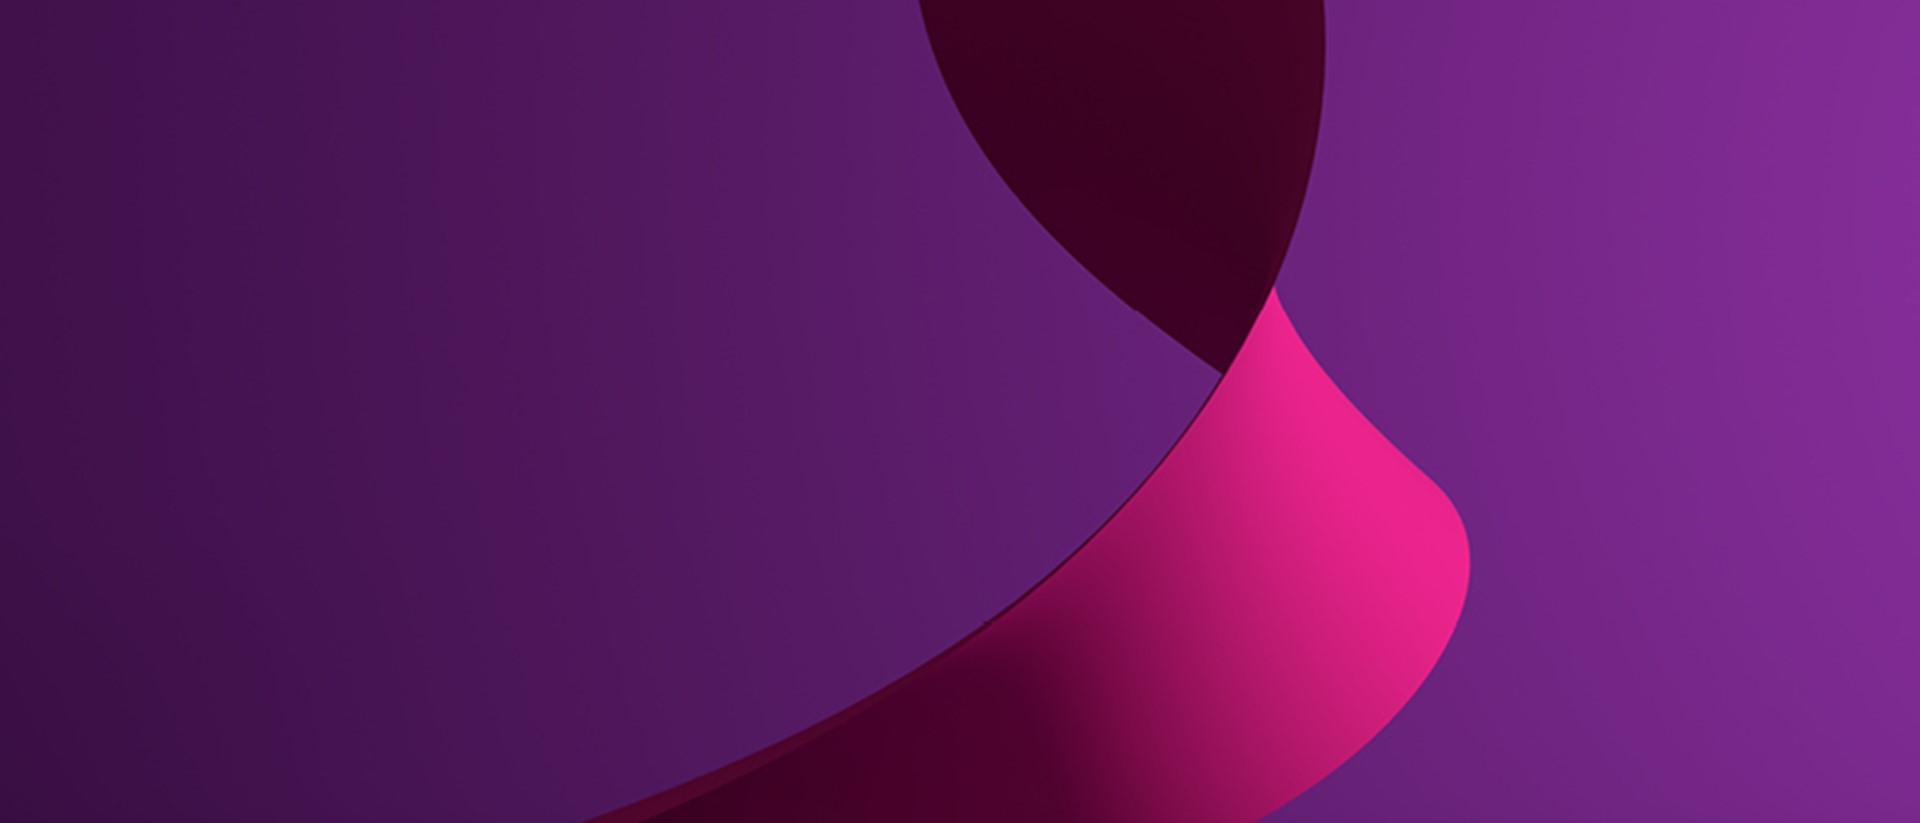 Hero image of one of 7IM's brand shapes in purple and pink